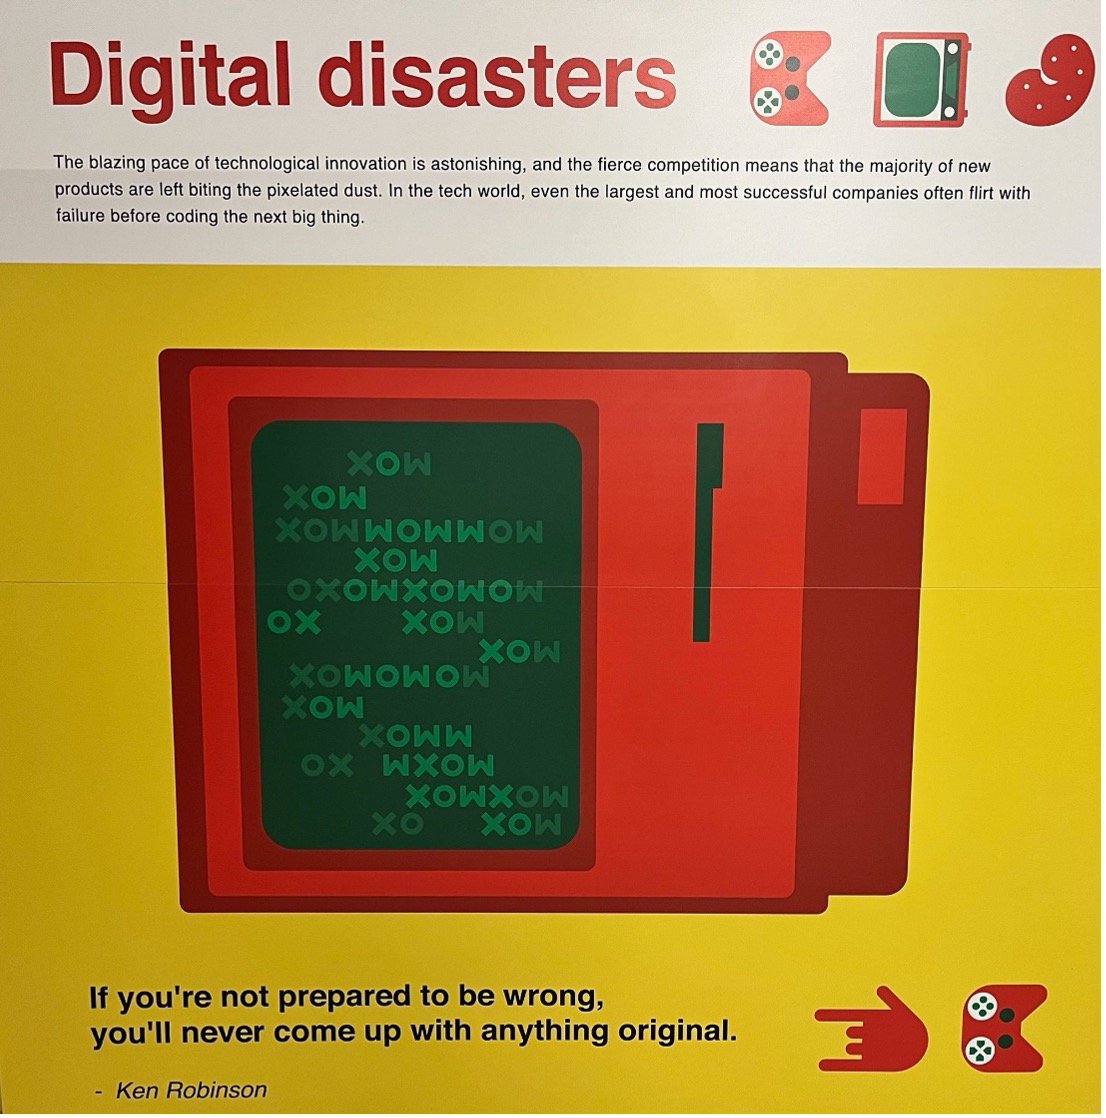 Digital Disasters in Museum of Failed Products